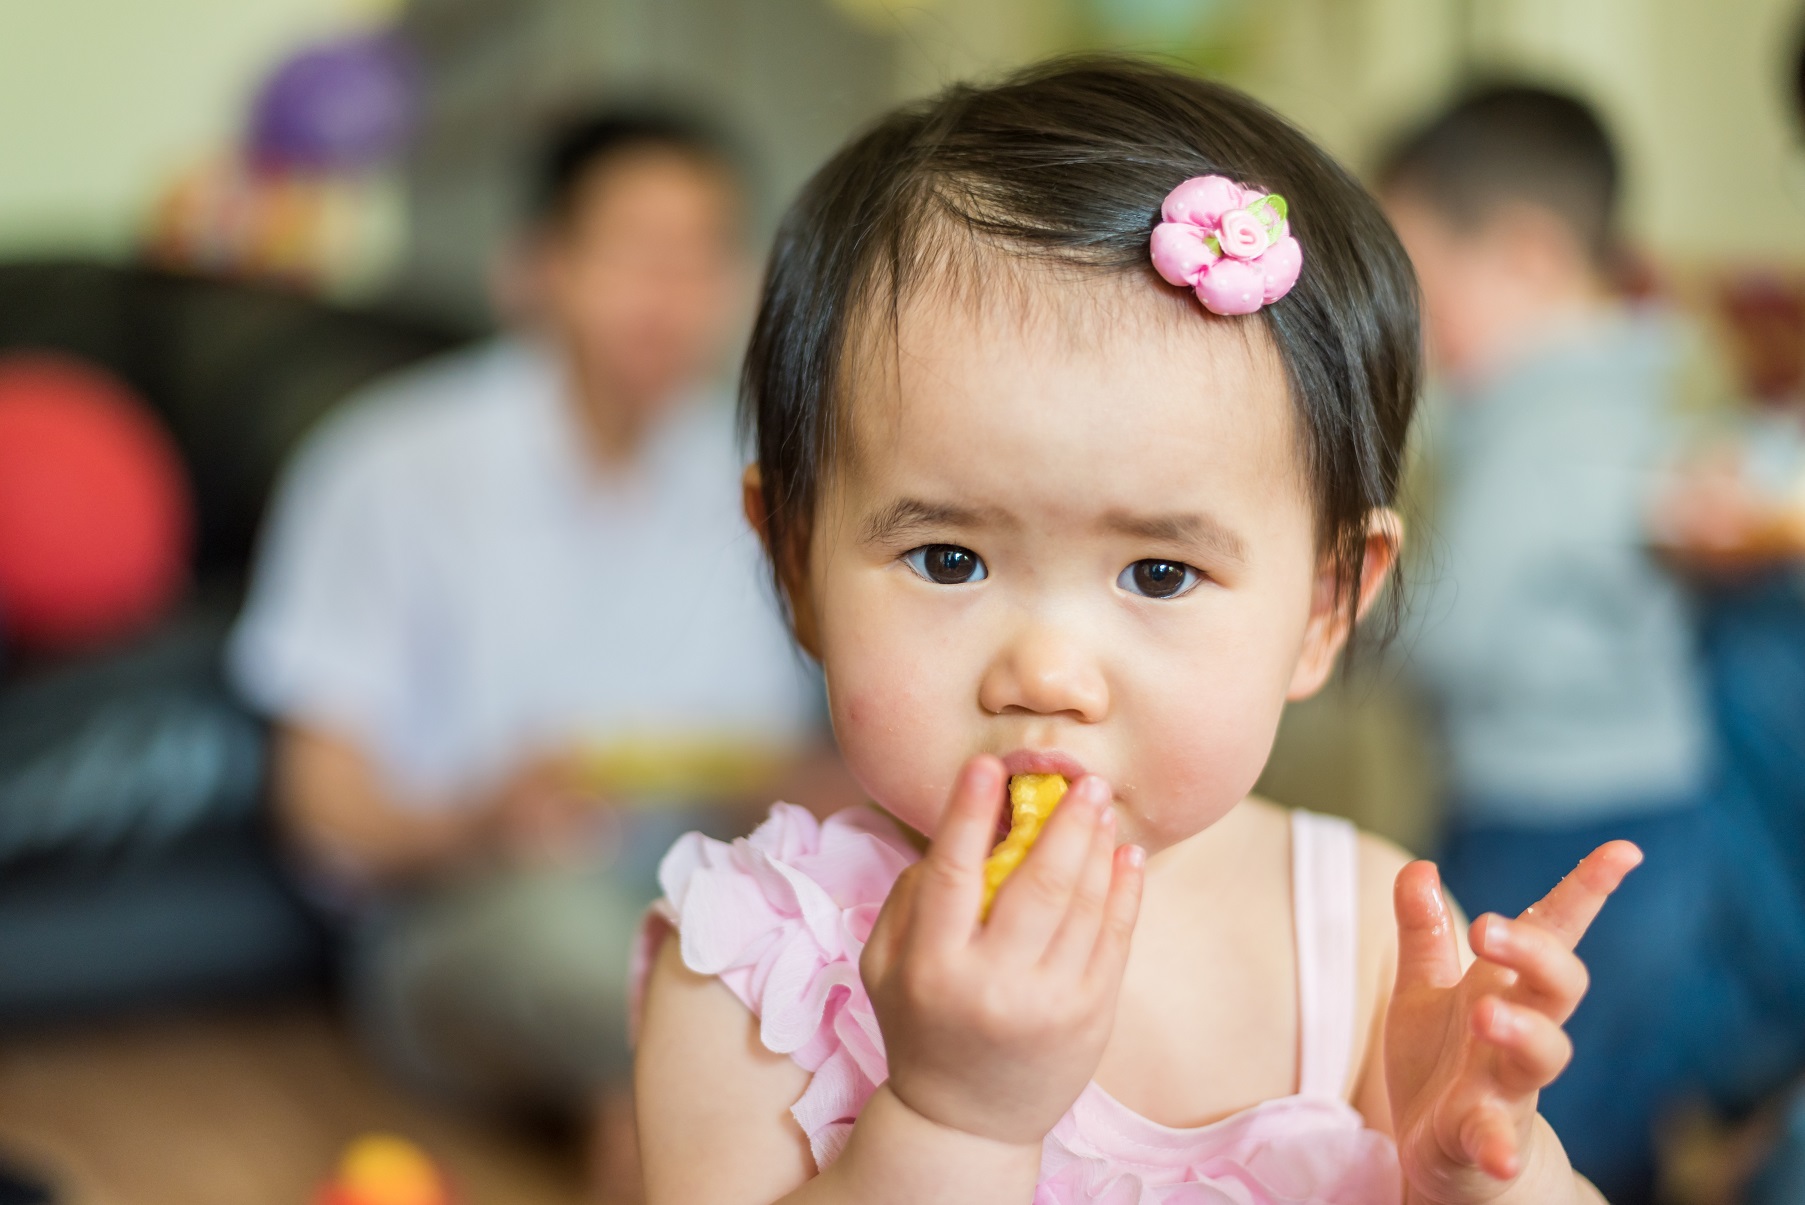 Finger Foods for Your Baby - The Pulse